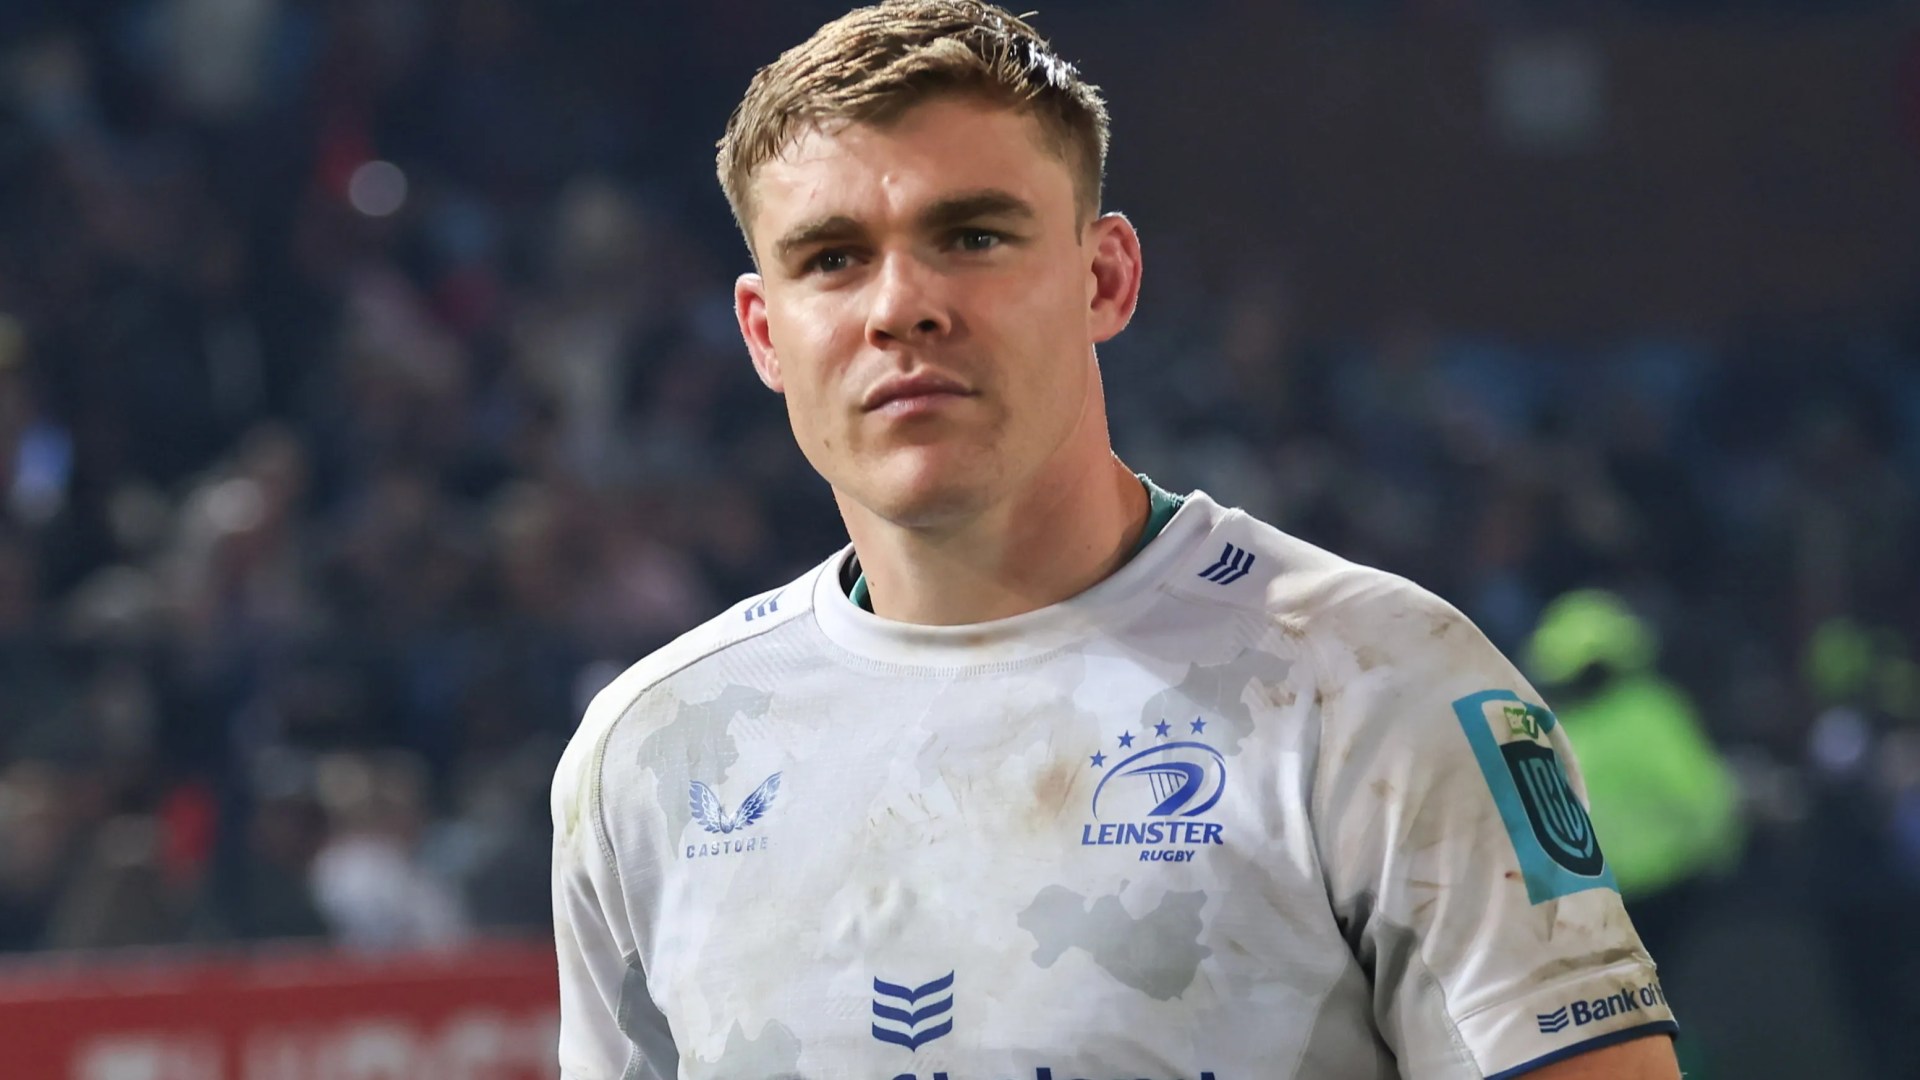 Garry Ringrose insists Leinster defeat has given him extra motivation as Ireland get ready for South Africa test series [Video]